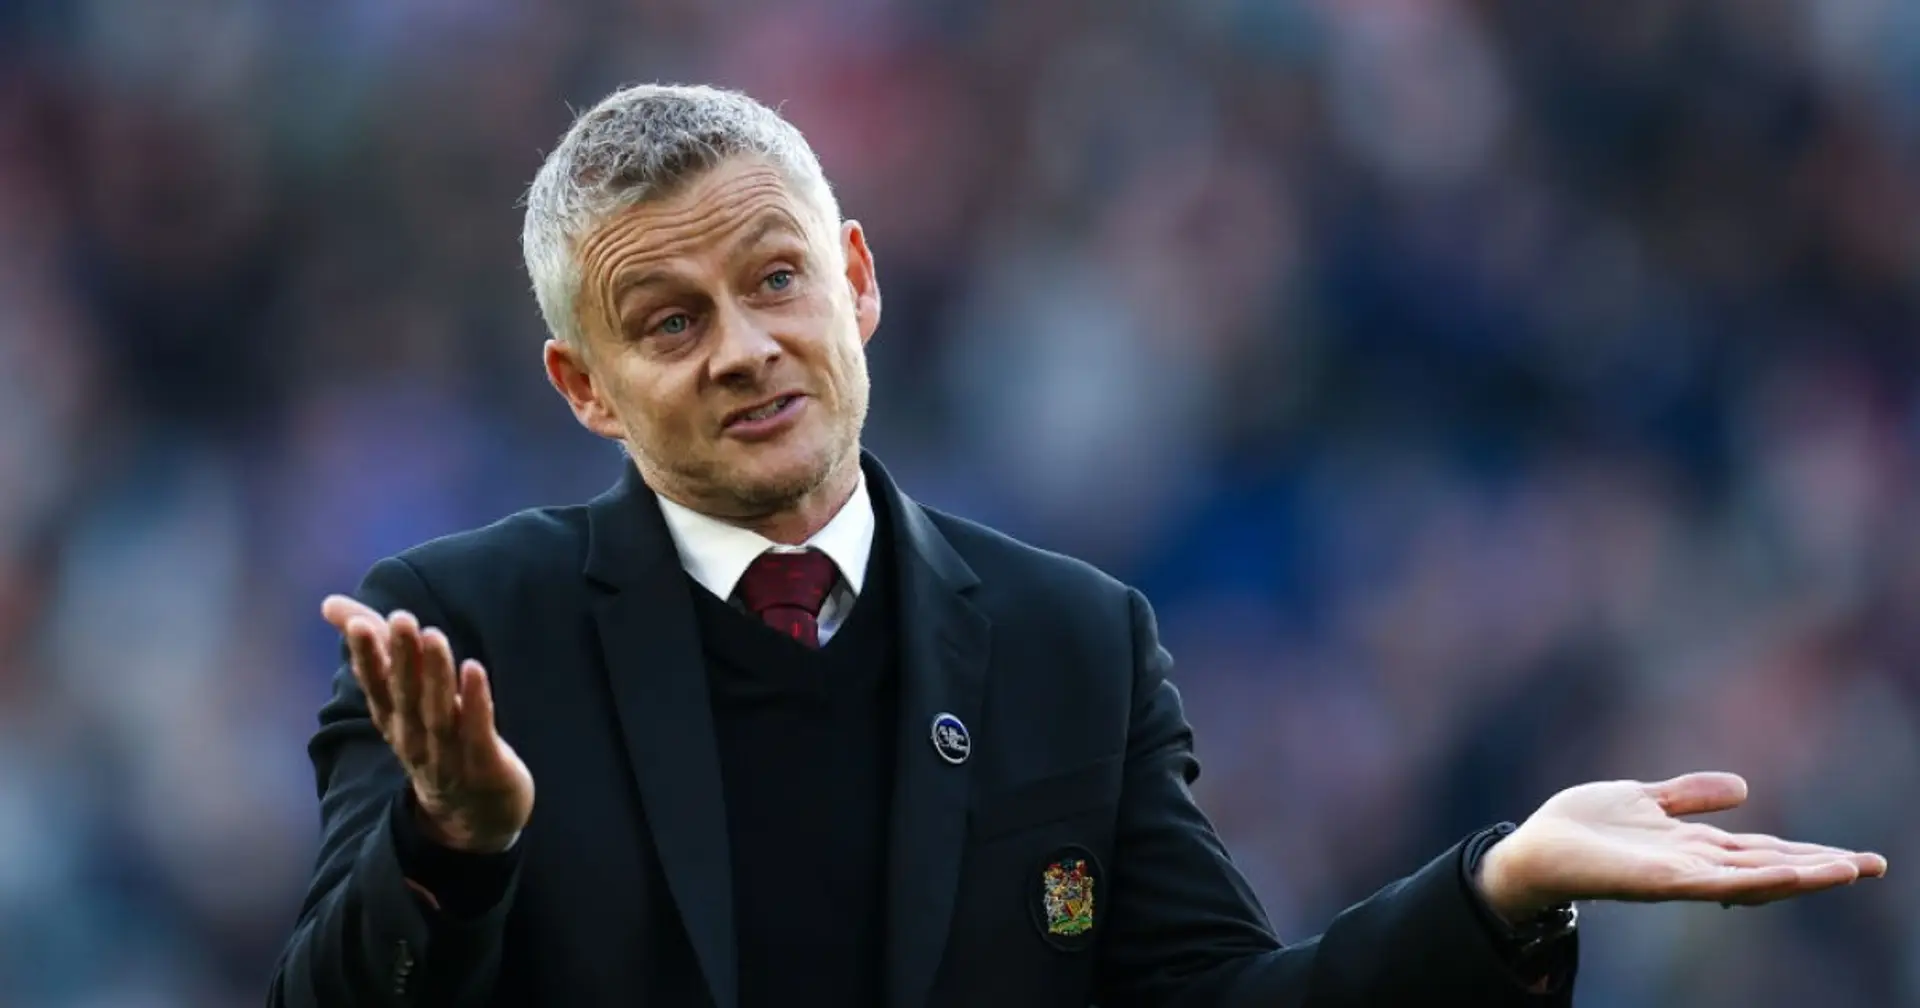 Solskjaer moved to second place in Premier League manager sack race after Leicester defeat